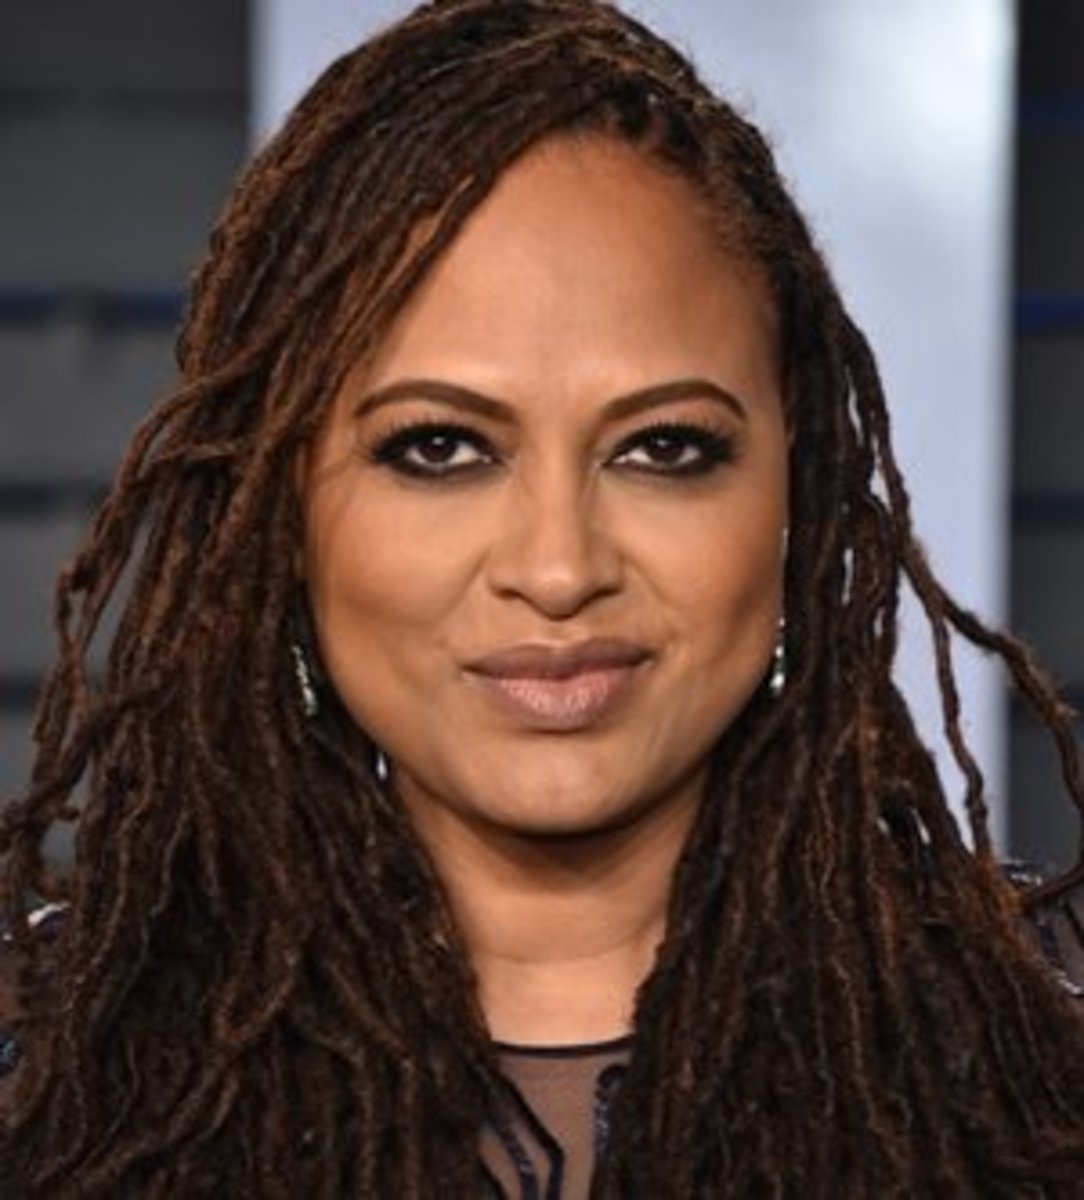 Ava Duvernay wearing dreads